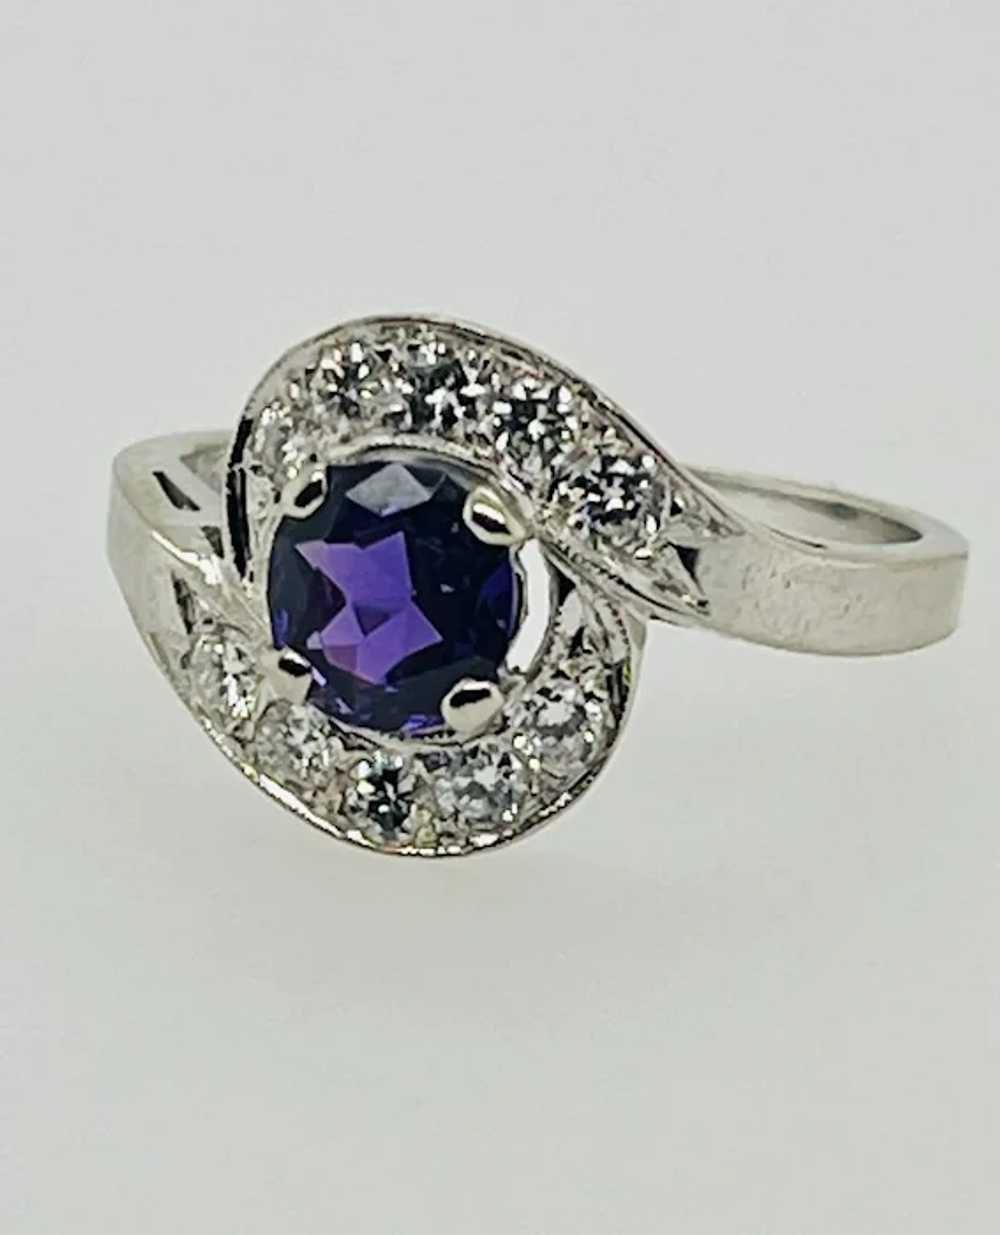 Vintage Amethyst and Sapphire Ring - image 4